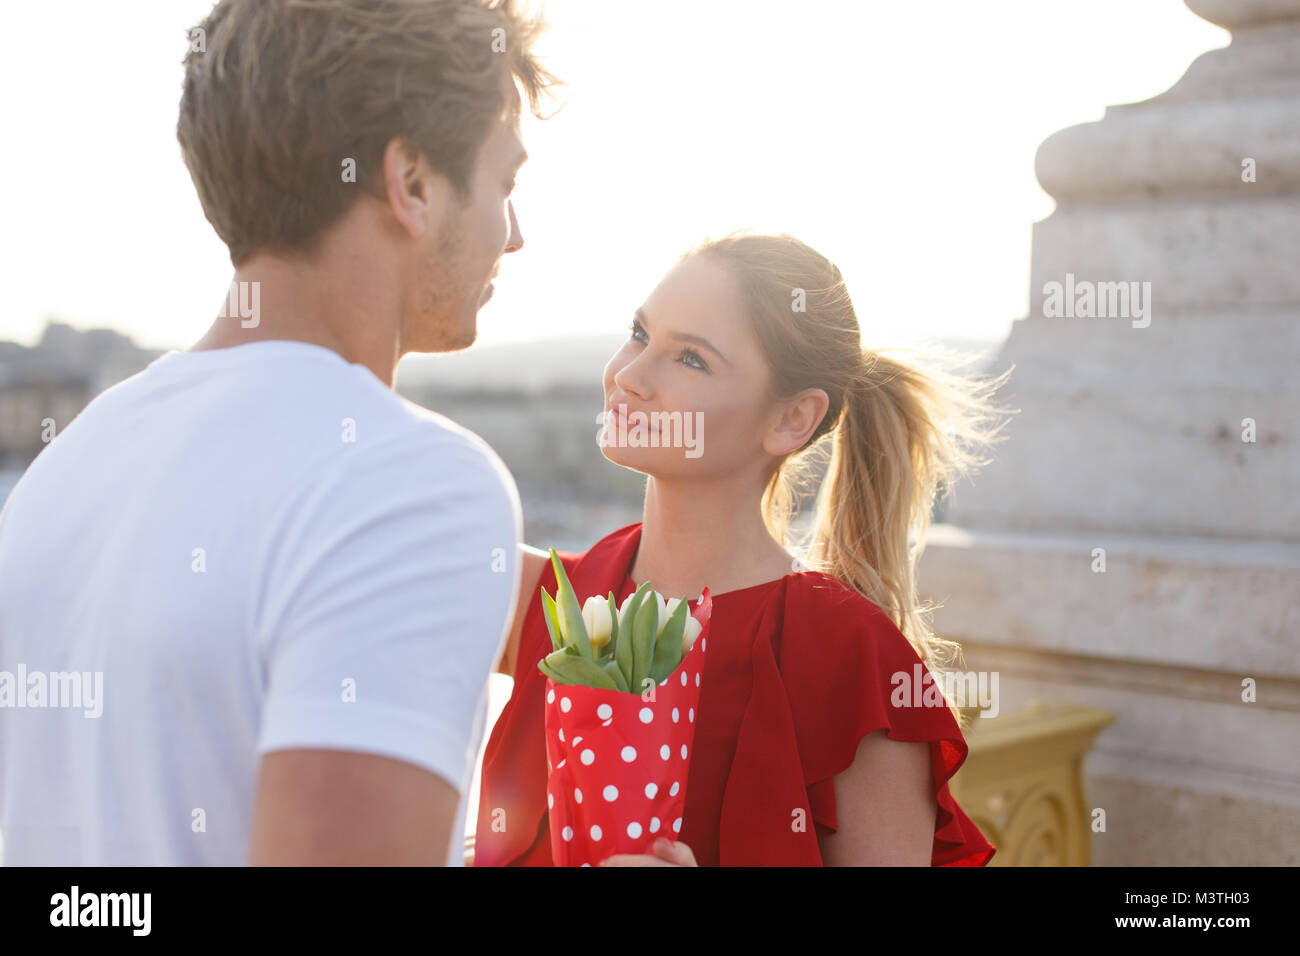 Young couple dating at srping outdoor, woman with bouquet Stock Photo